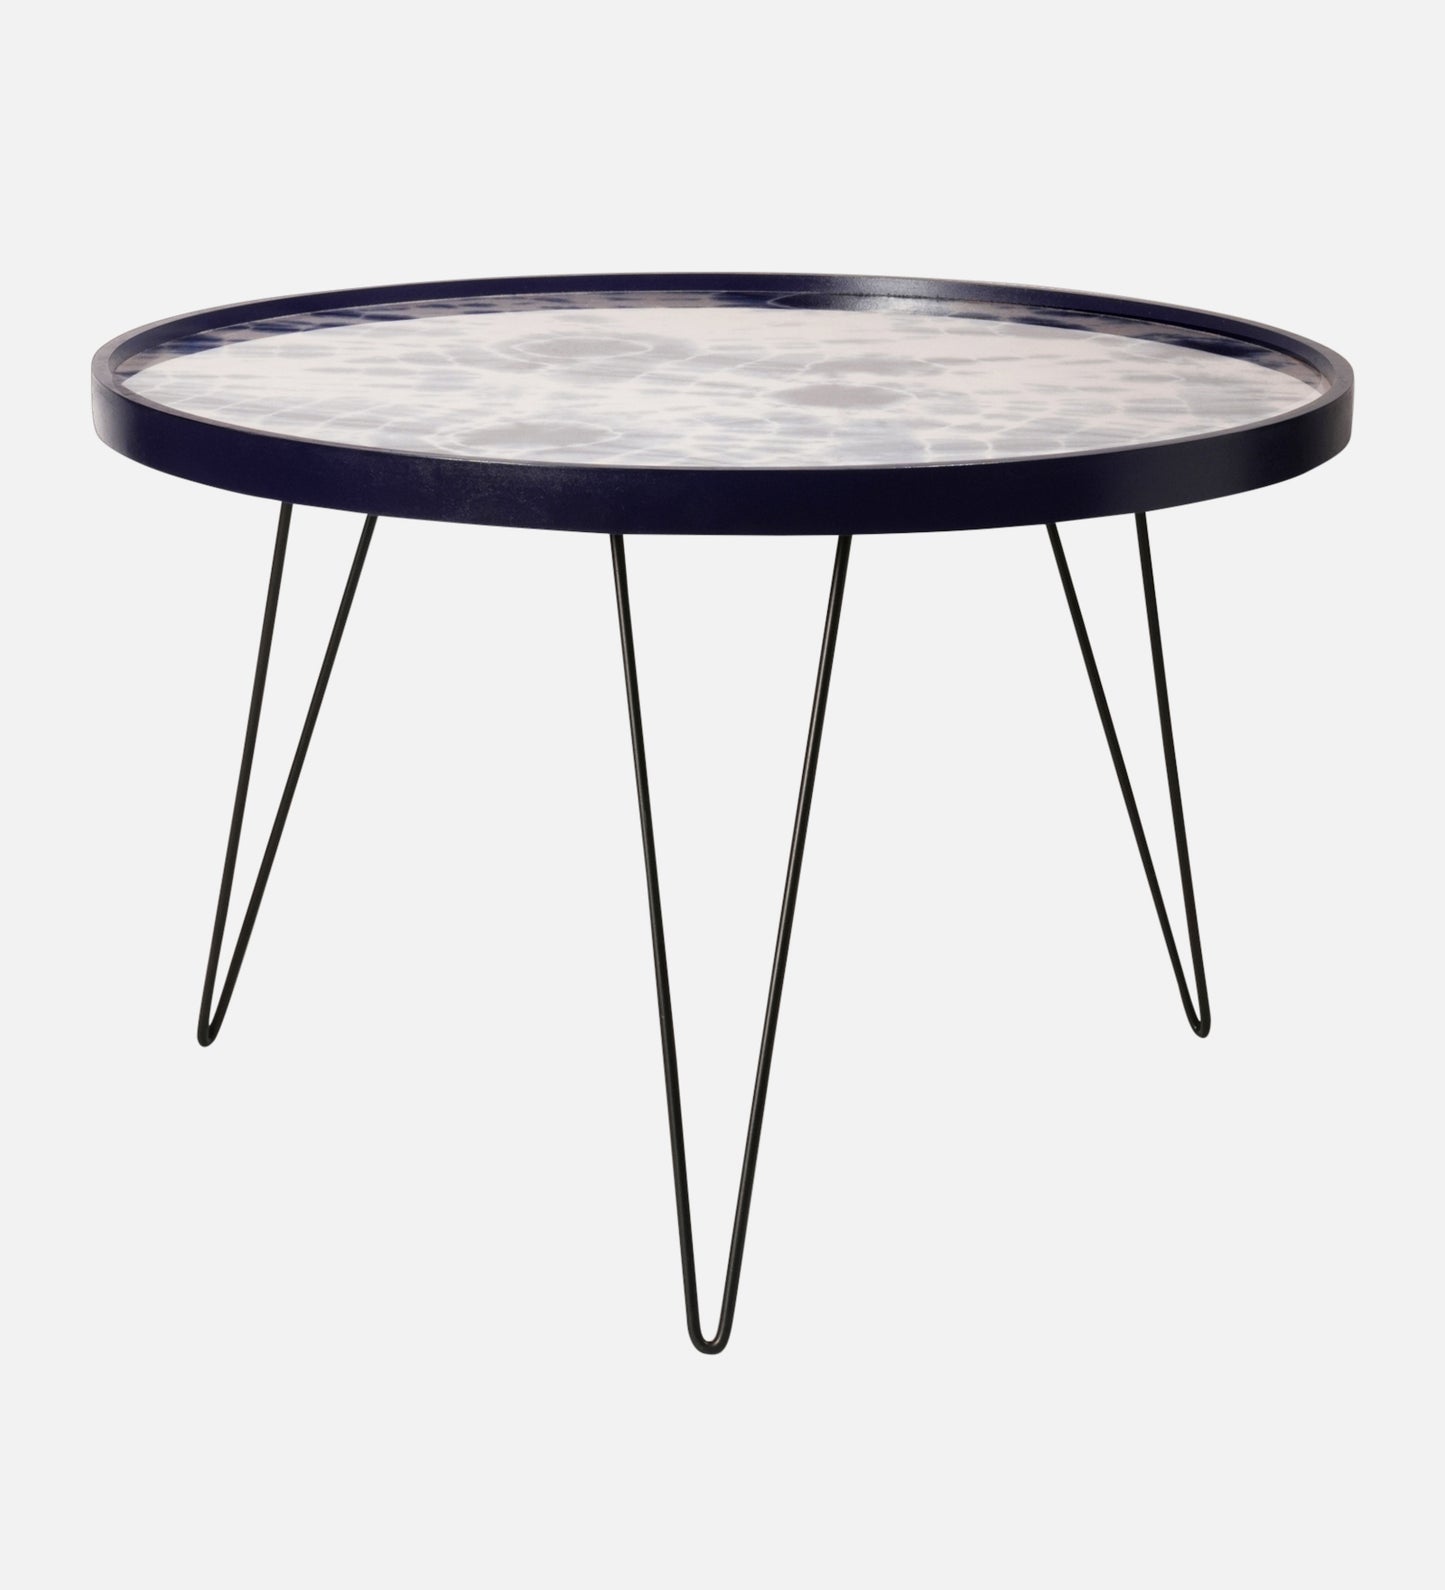 Shibori Round Coffee Tables, Wooden Tables, Coffee Tables, Center Tables, Living Room Decor by A Tiny Mistake